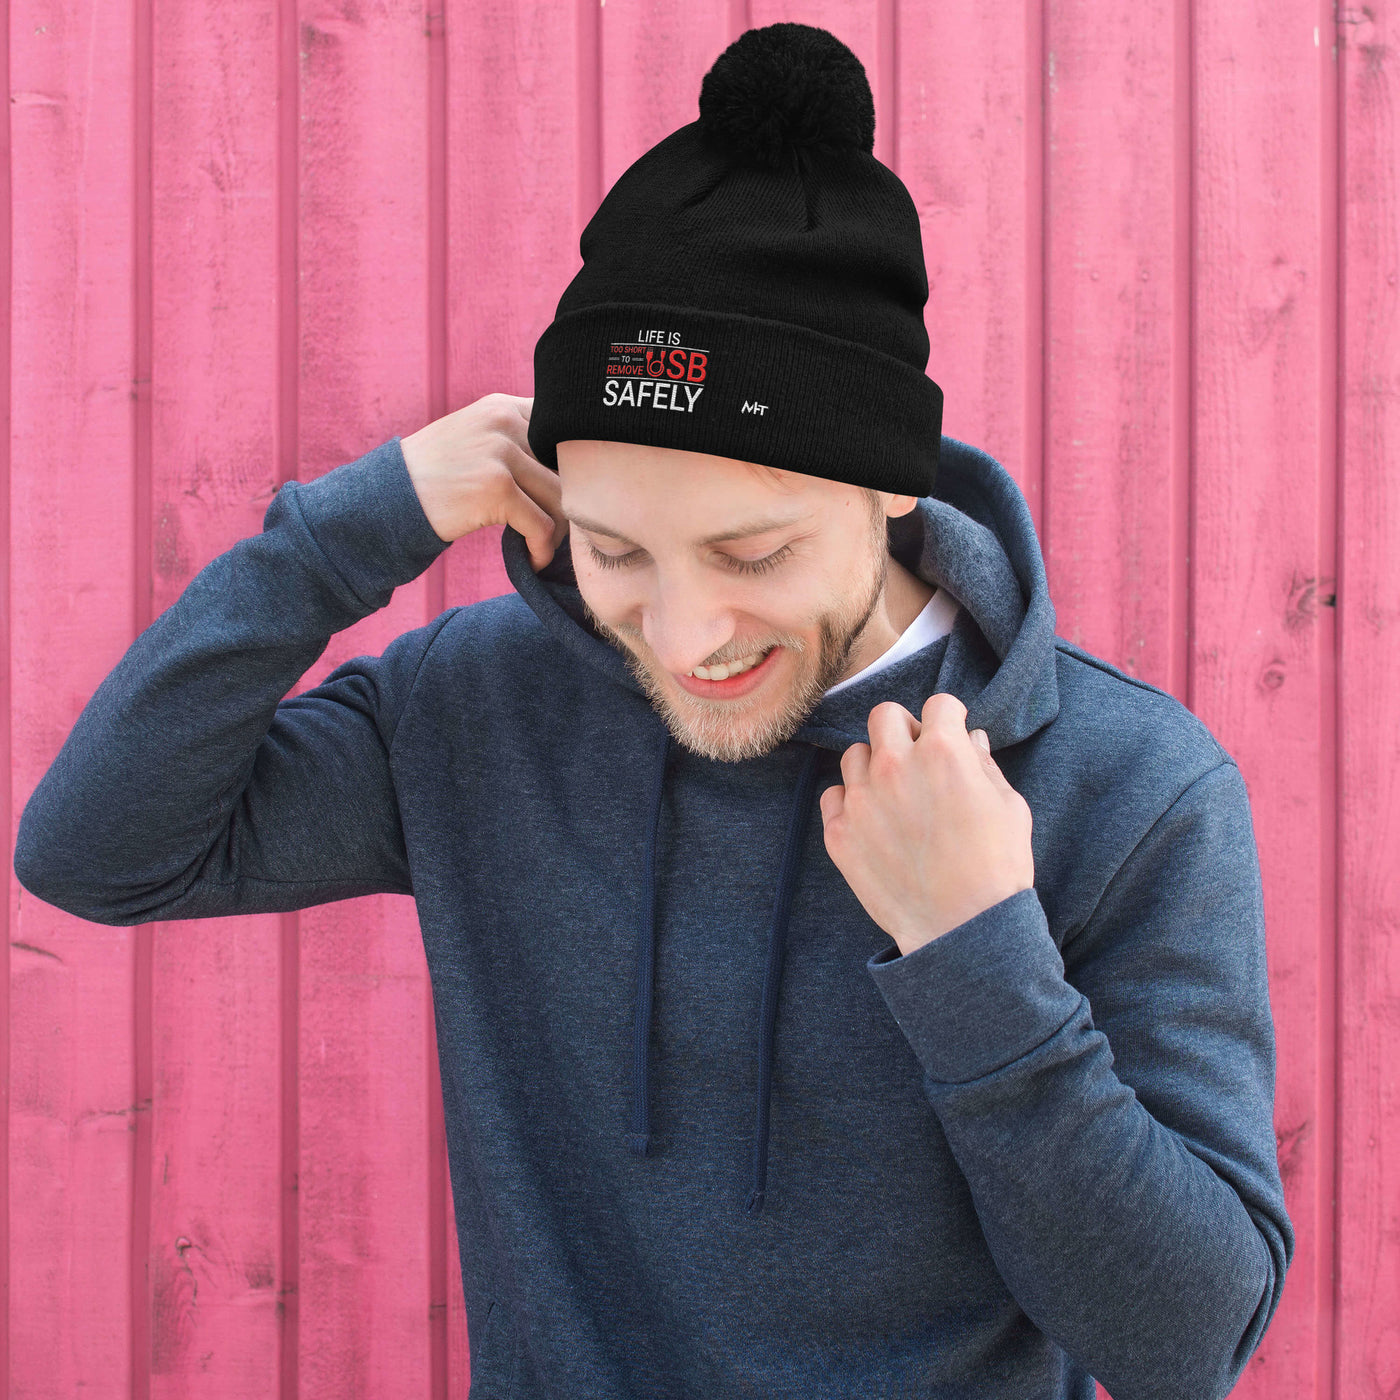 Life is too Short to Remove USB Safely - Pom-Pom Beanie